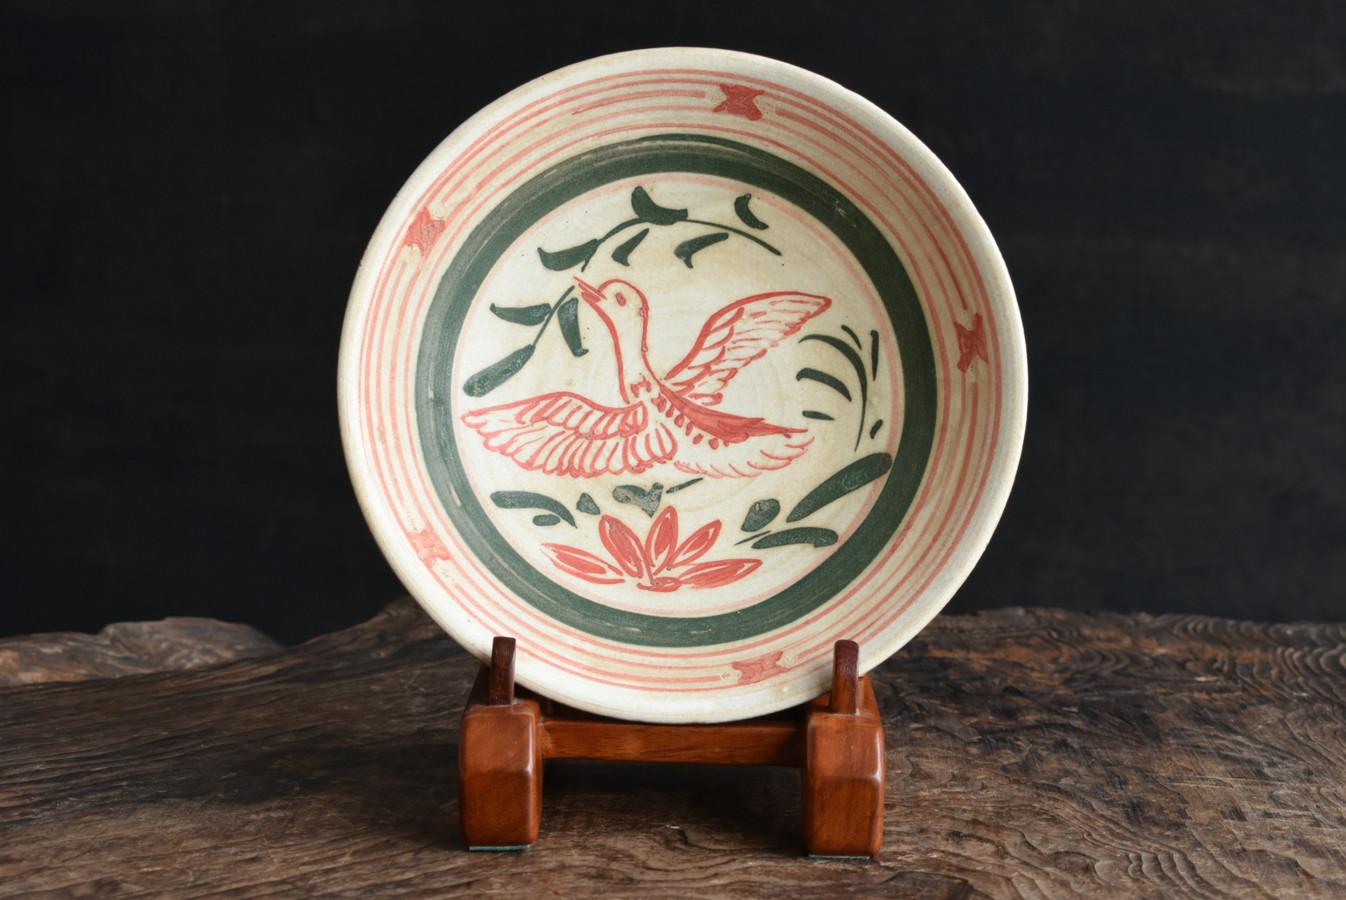 This is a plate made in China in the 13th century.
This plate was made during the Jin dynasty when China was divided into several countries.
Different places in China produced different colors of pottery with different designs.

Among them, this one